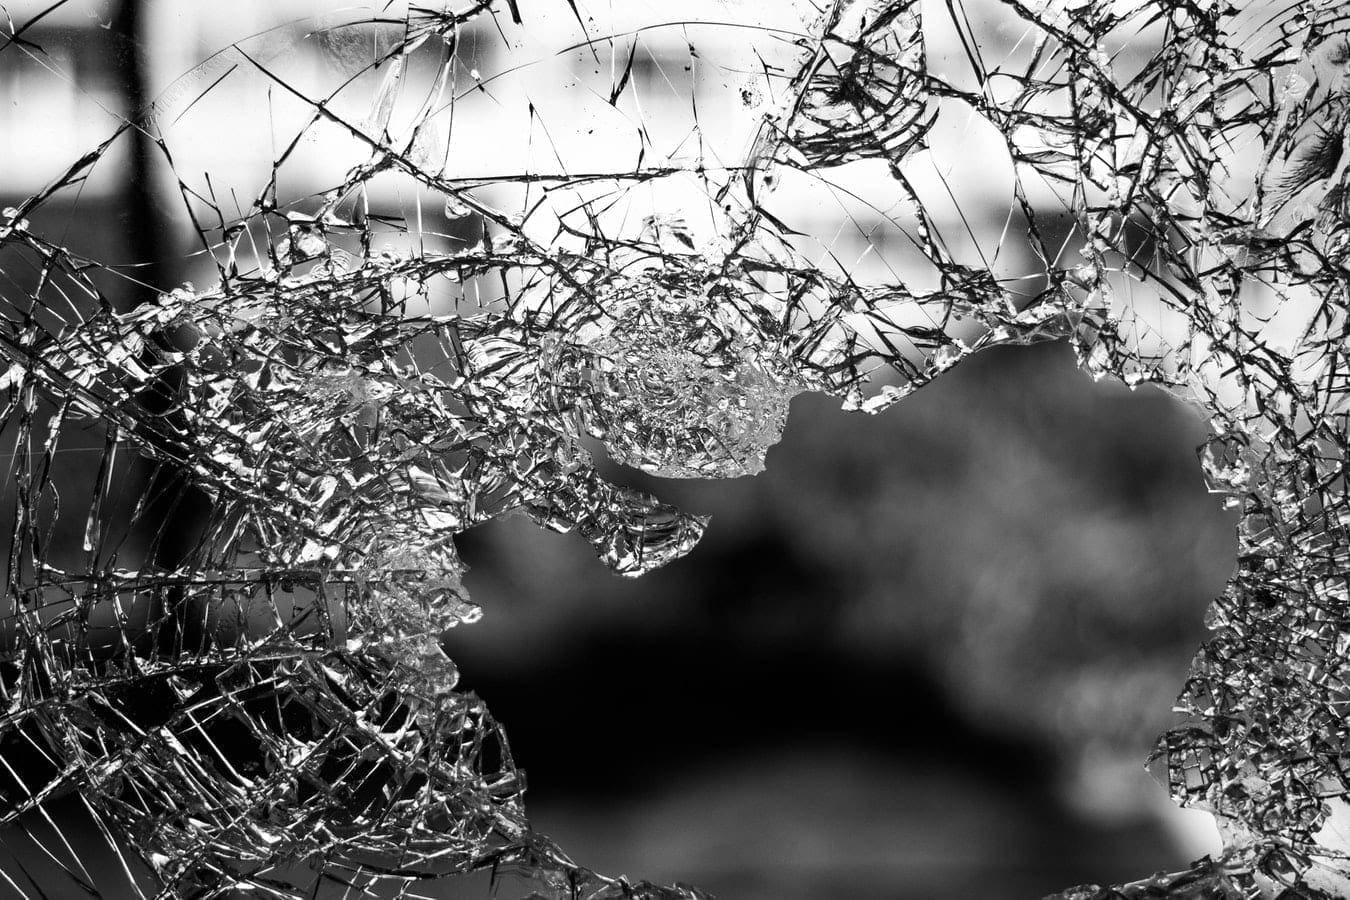 smashed and broken glass that needs insurance from vandals